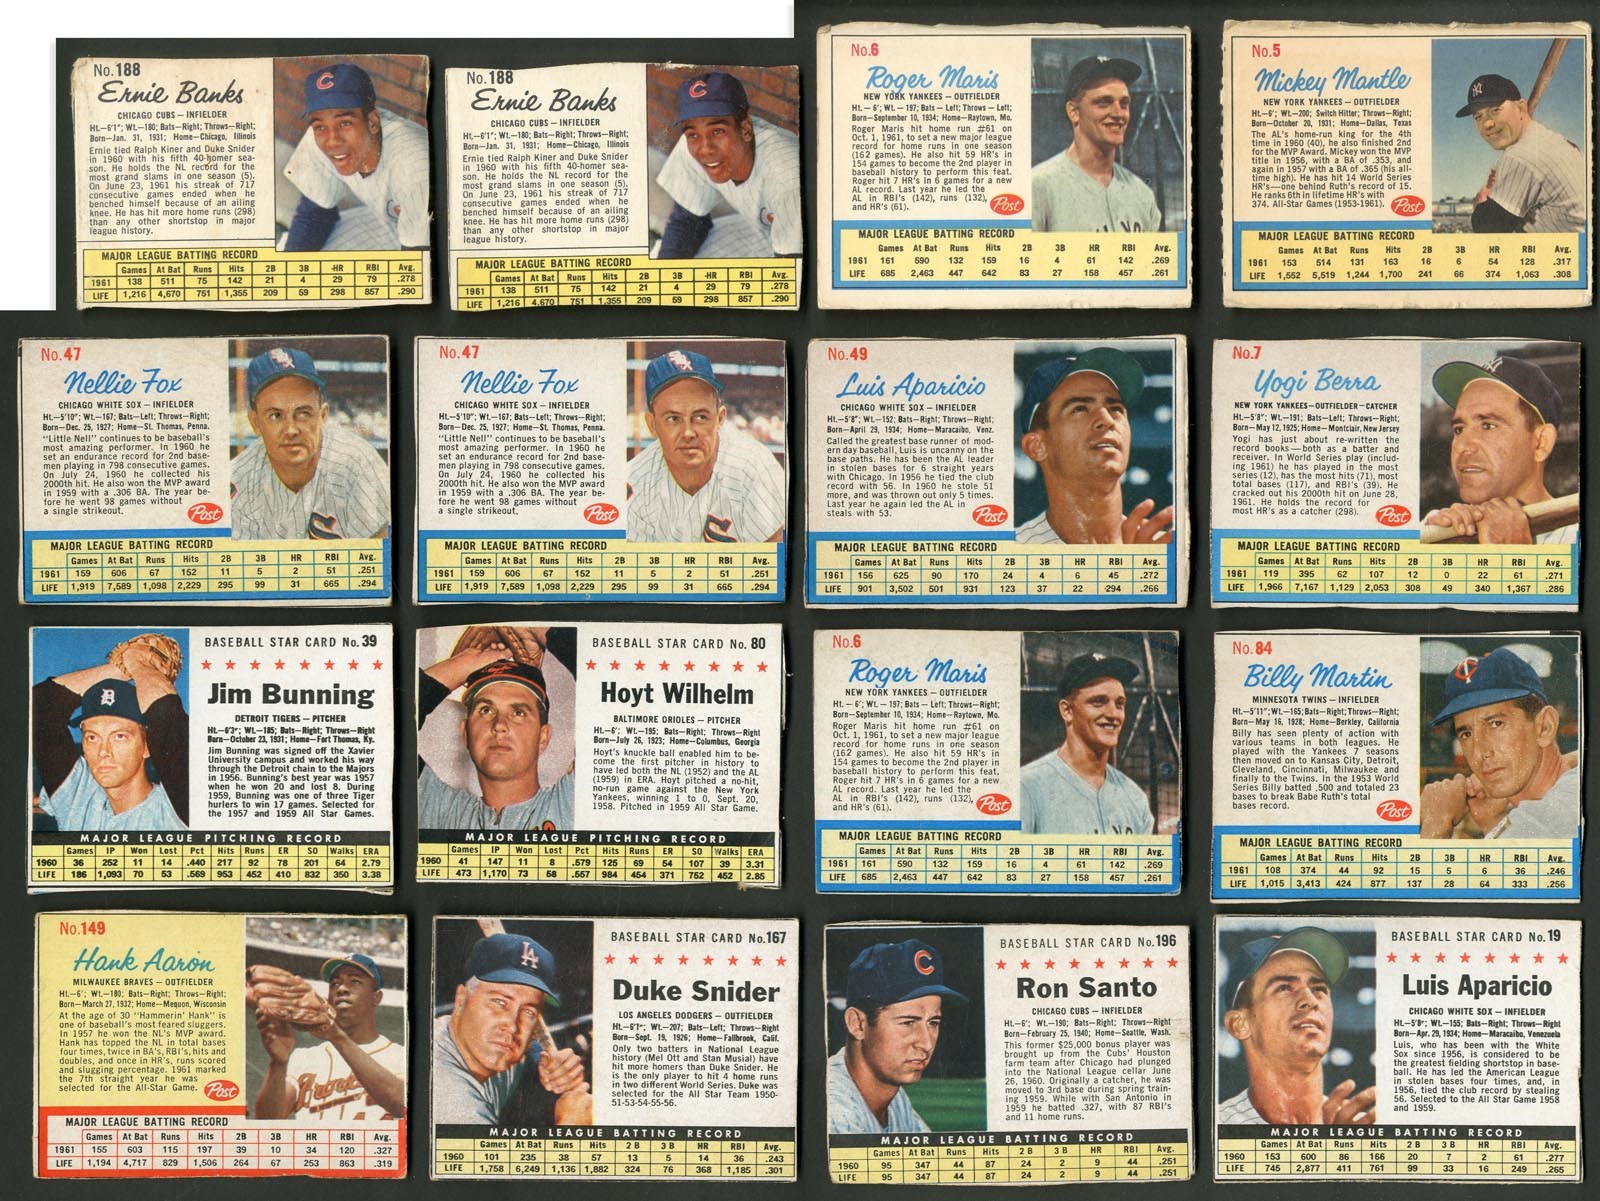 1961-63 Post Cereal Collection - Mantle (Ad Back), Clemente, Aaron, Maris (190+)